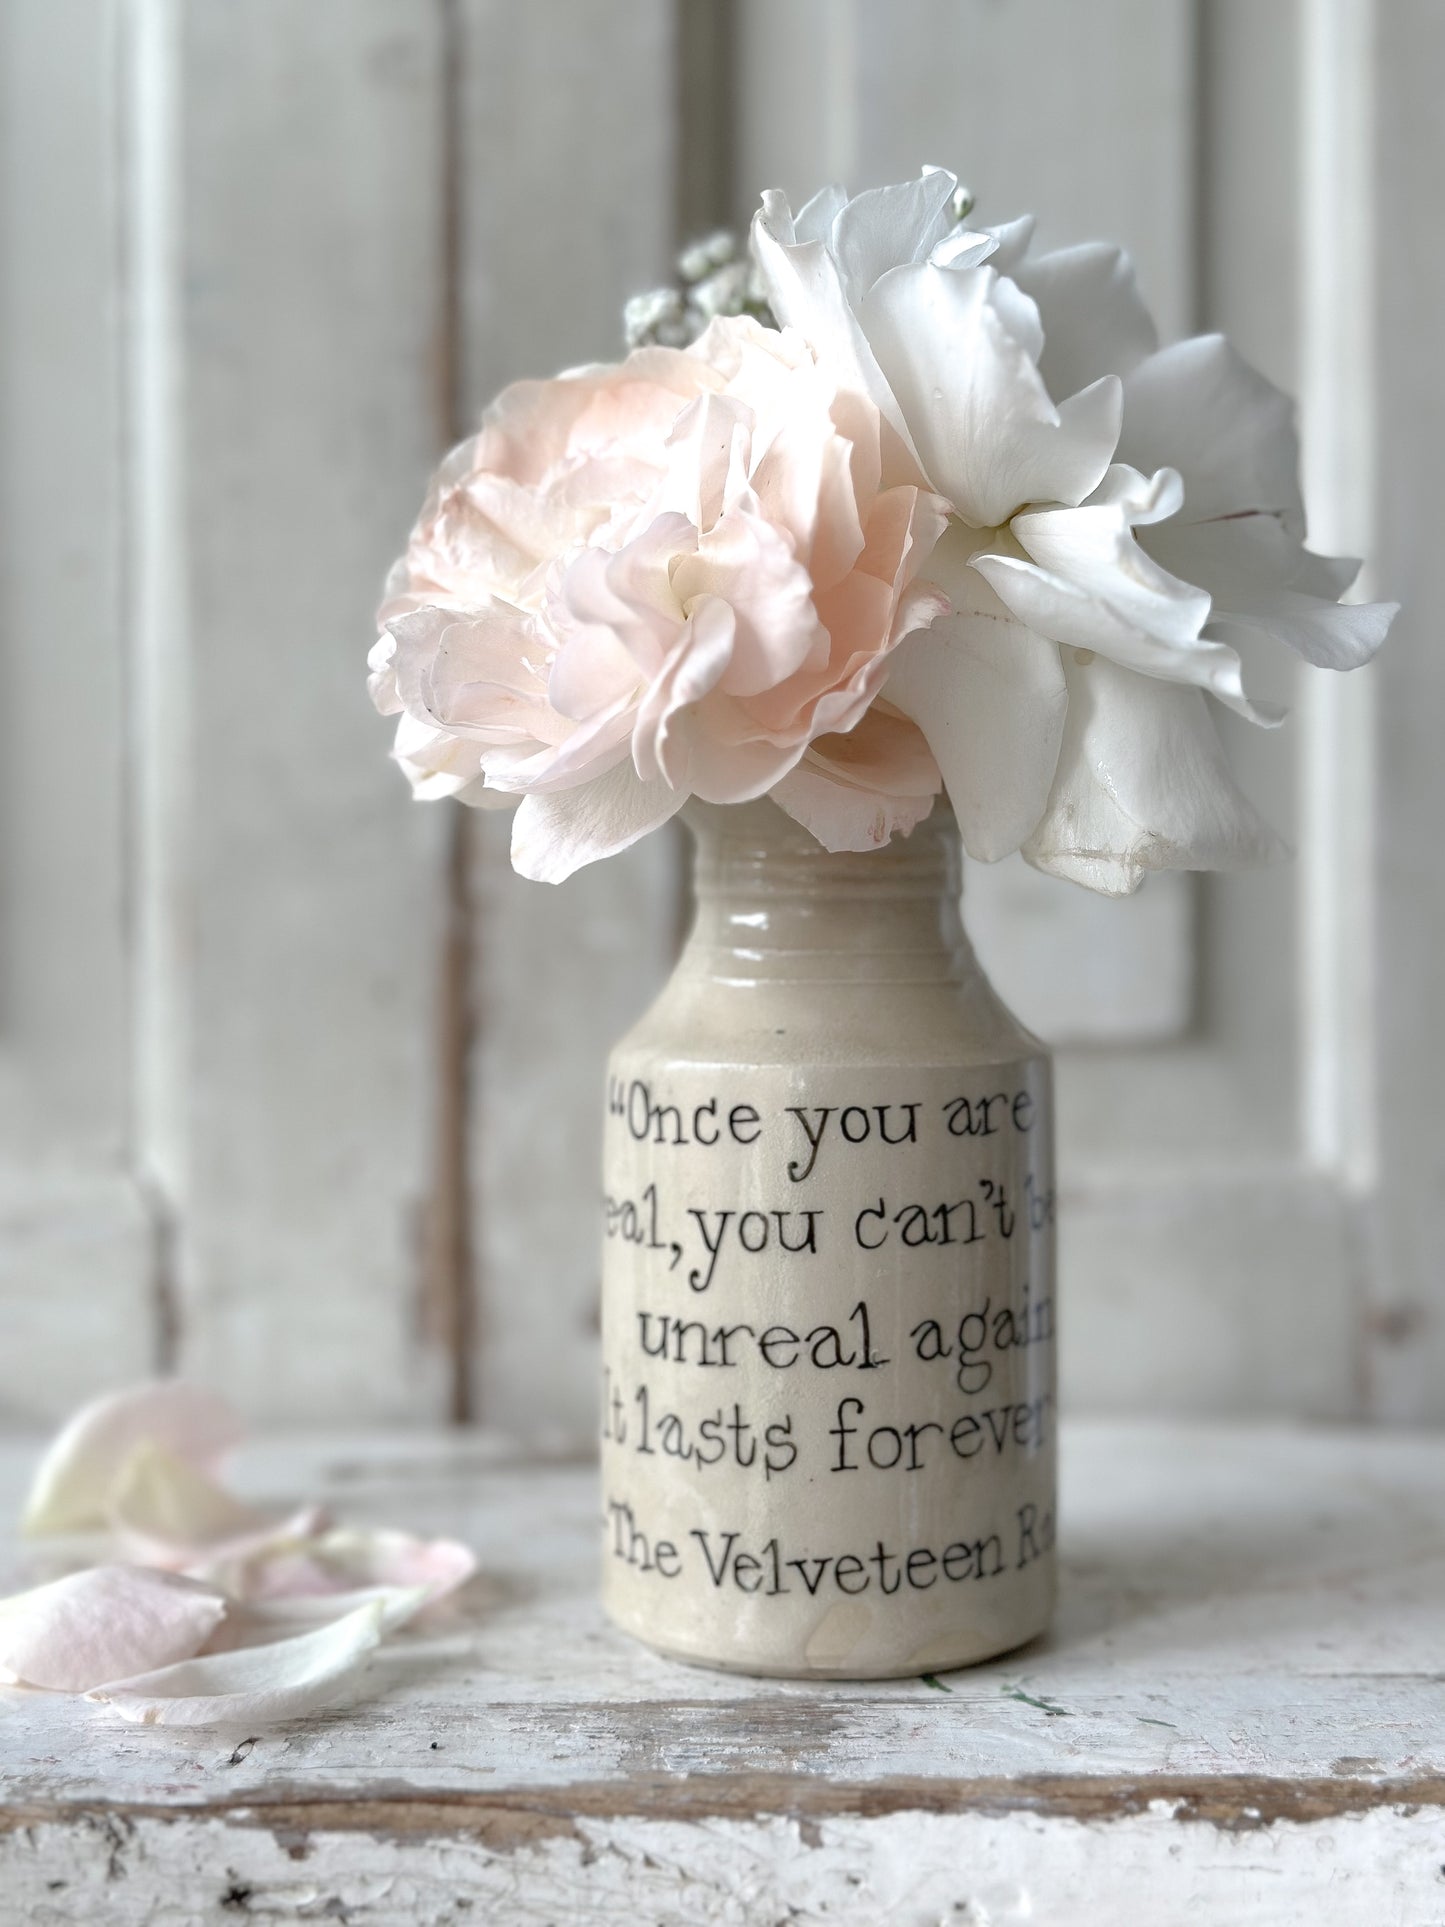 A Victorian unearthed stoneware pottery bottle with a hand painted quote